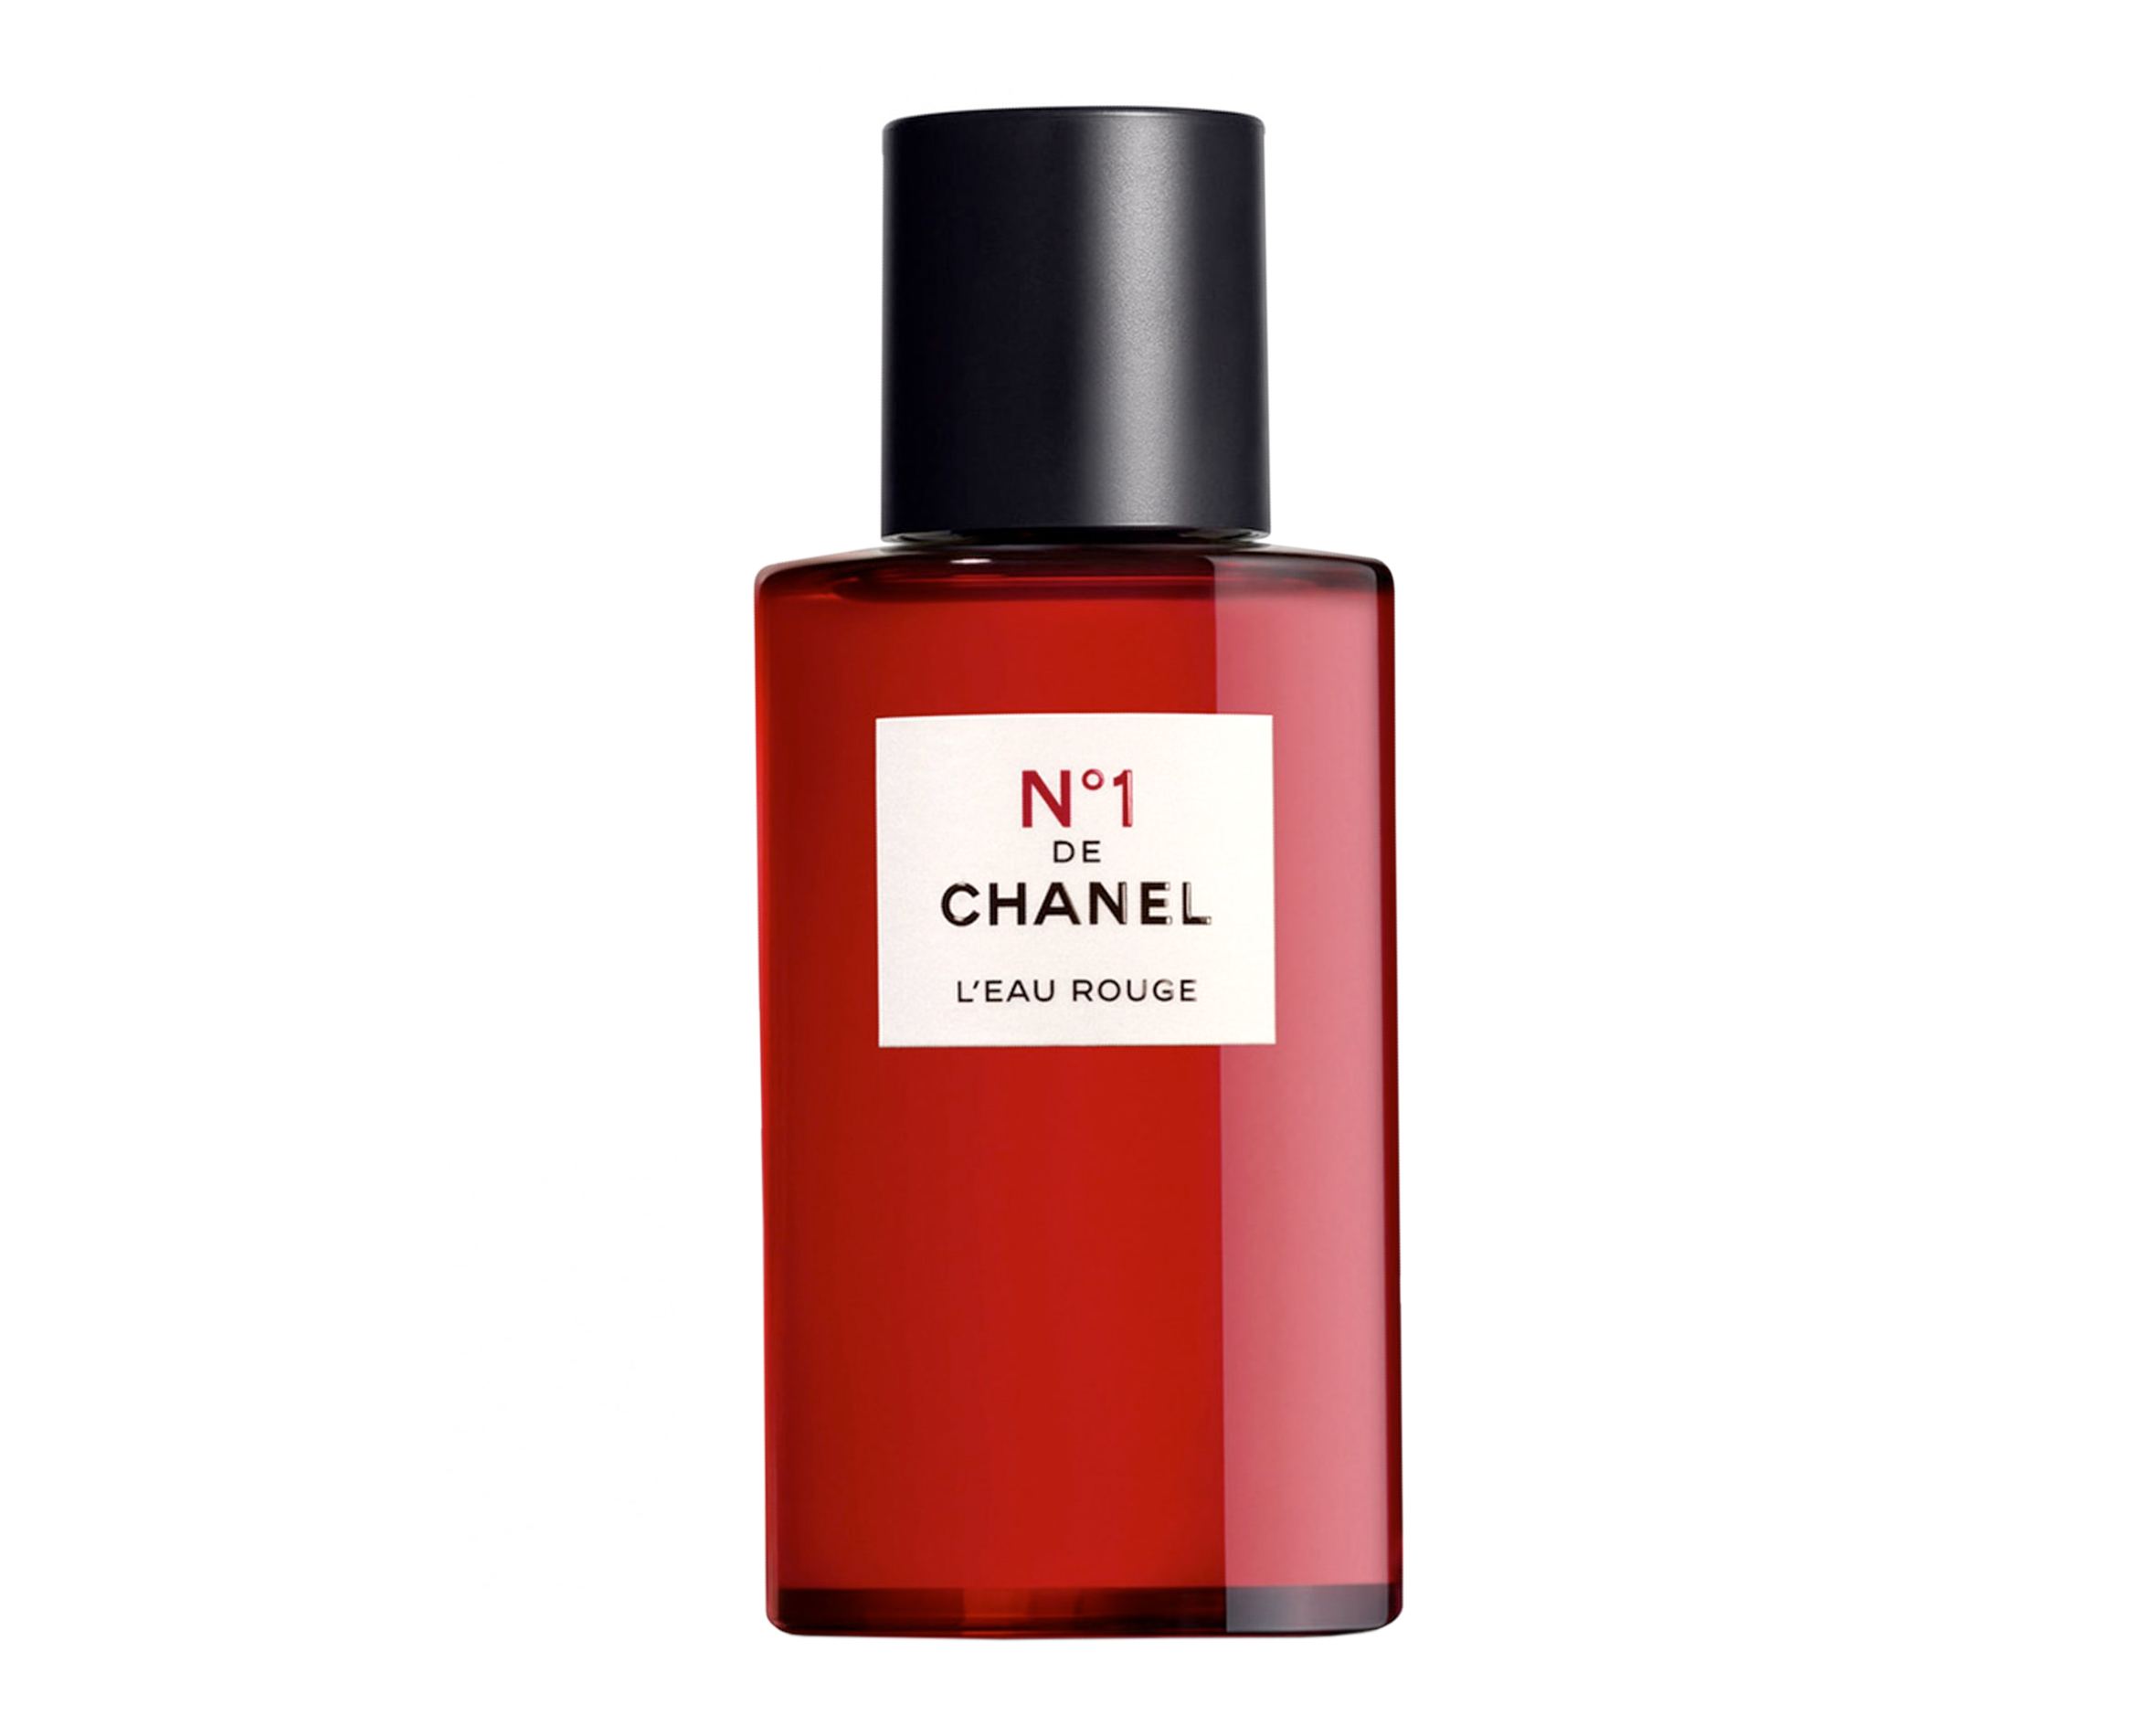 CHANEL N°1 L'EAU ROUGE Fragrance Review - CHANEL No1 Perfume and